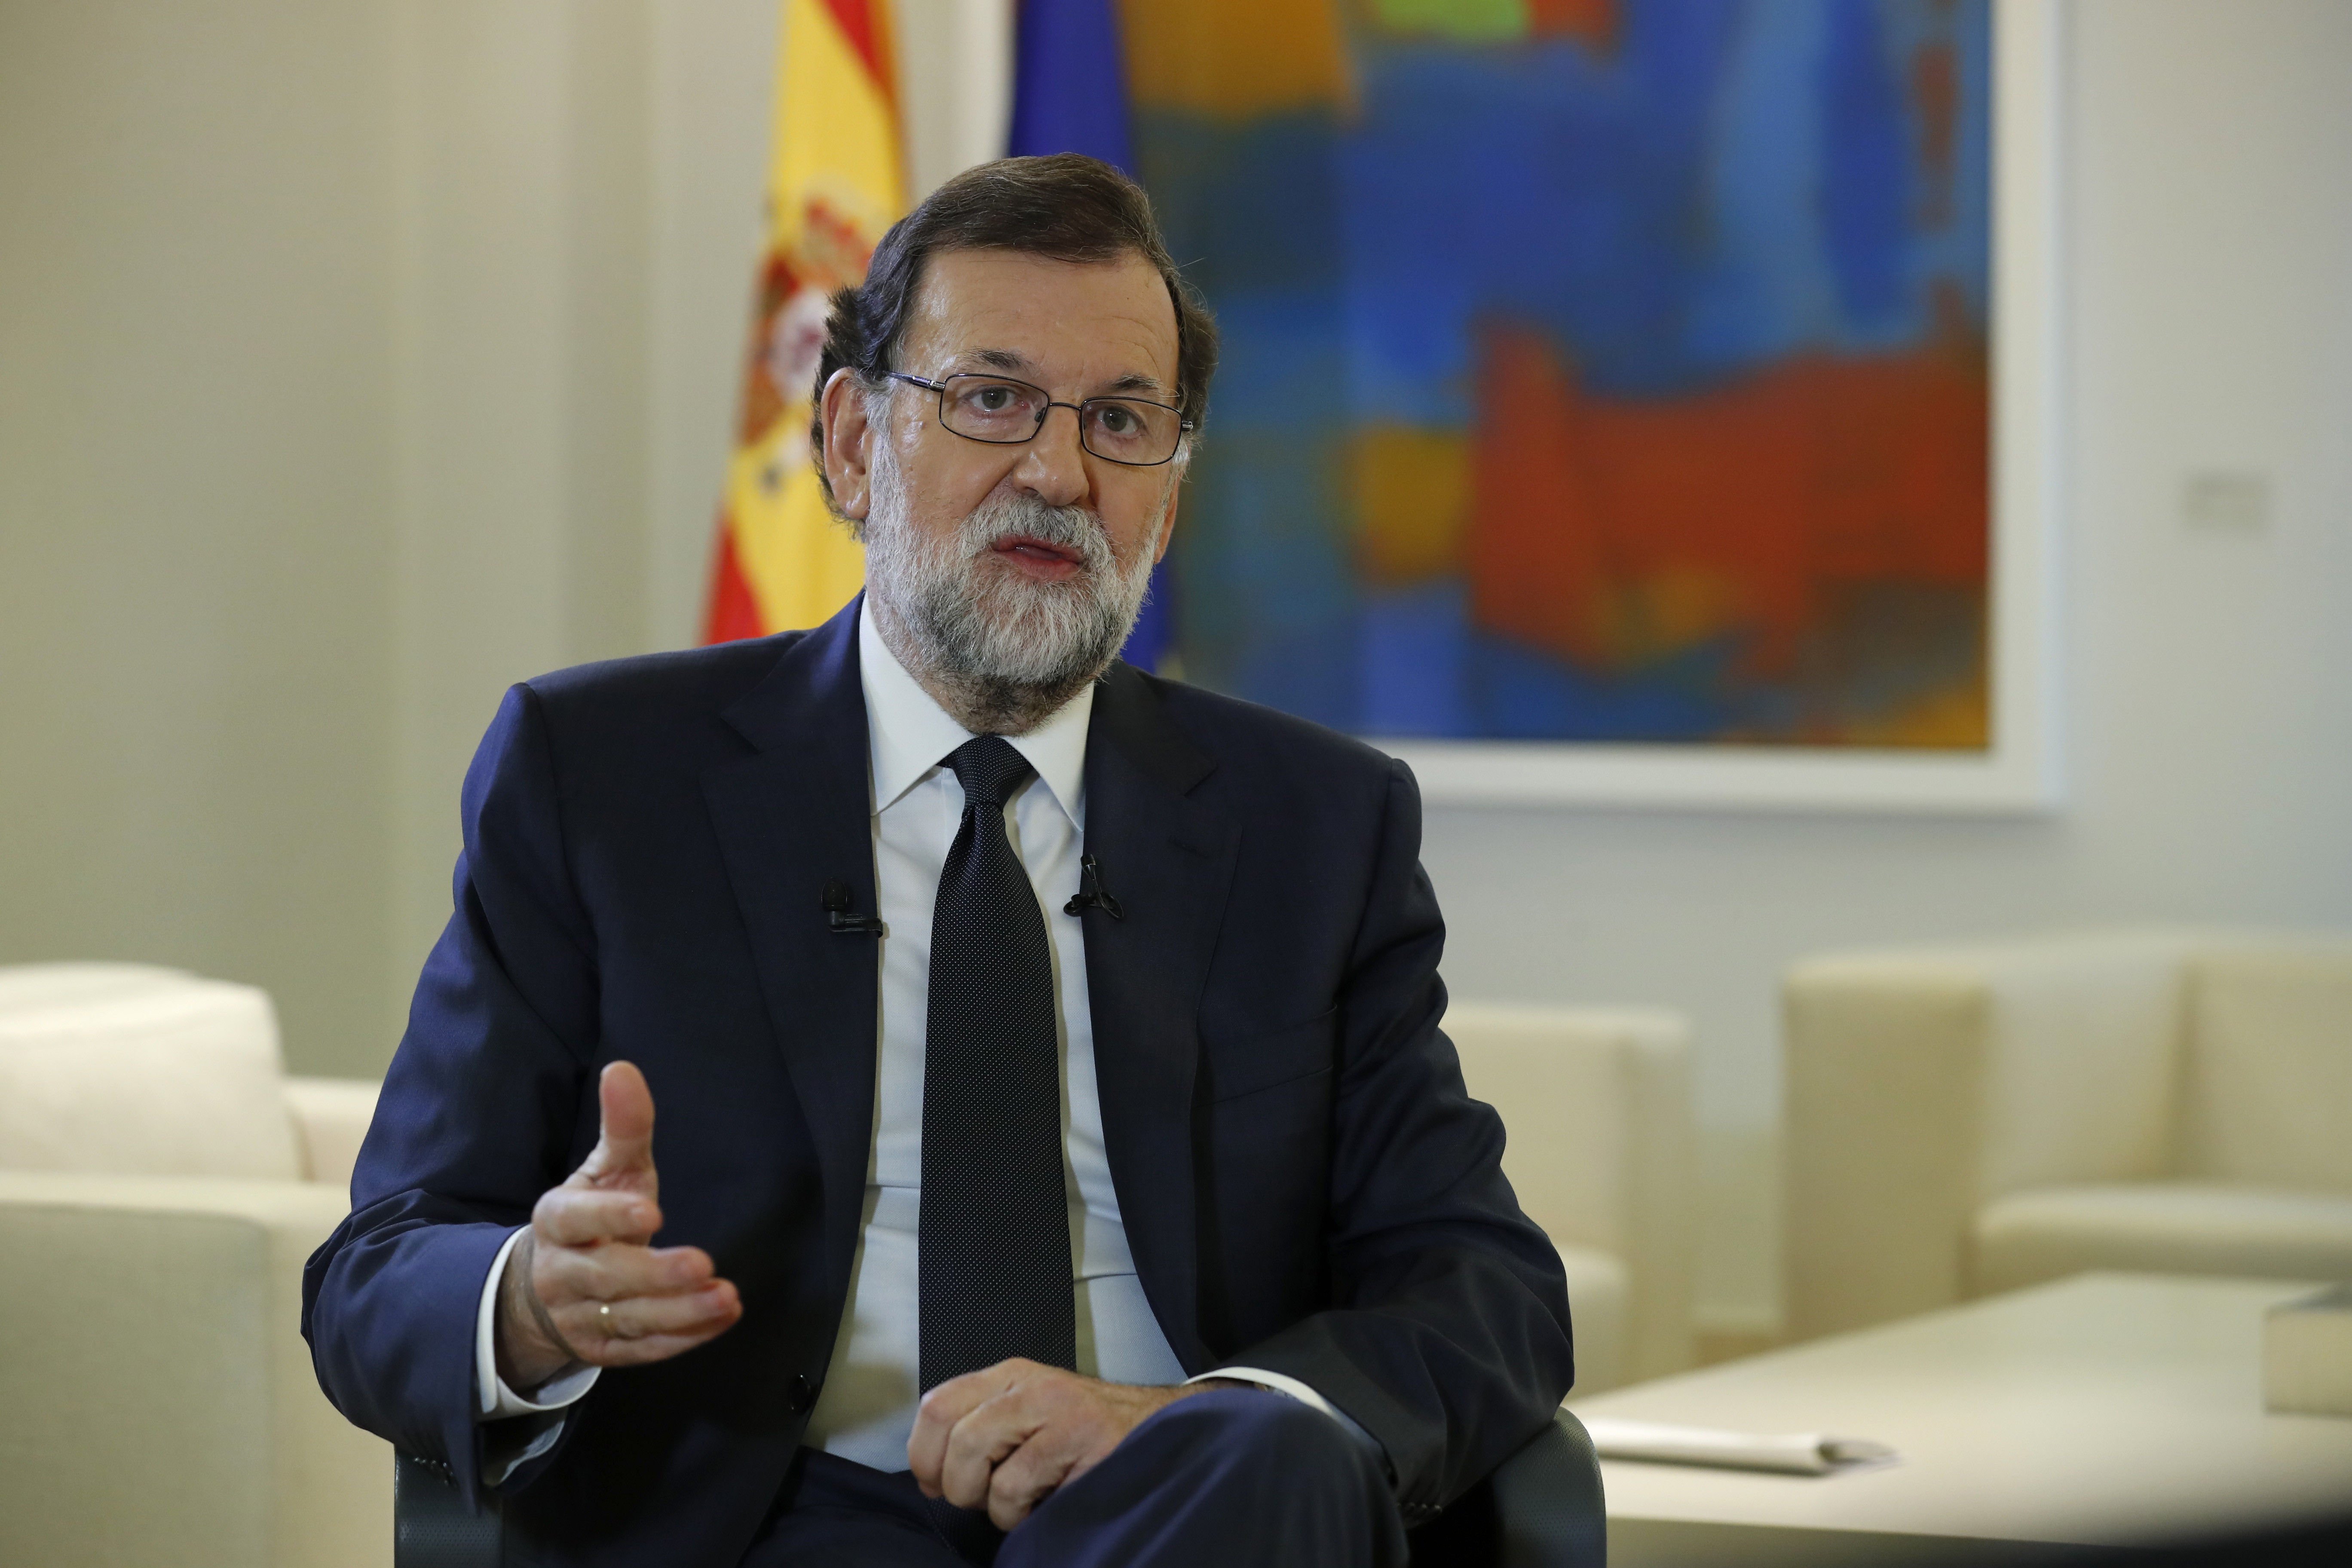 PM Rajoy to appear in Spanish Congress Wednesday in middle of Catalan crisis